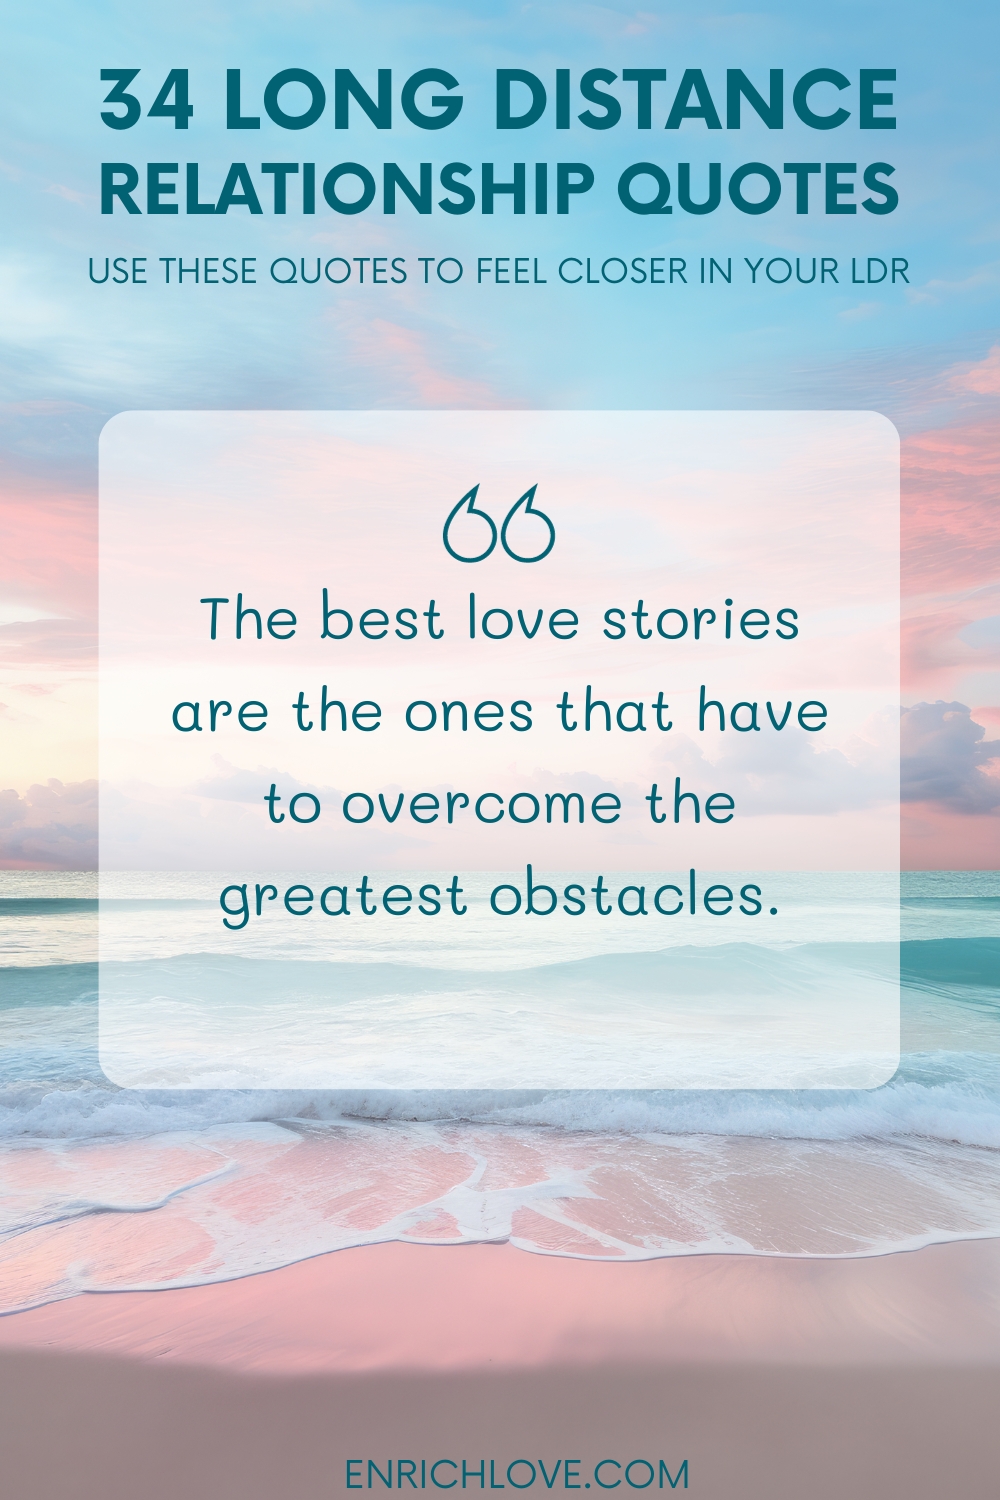 34 Long Distance Relationship Quotes - The best love stories are the ones that have to overcome the greatest obstacles.